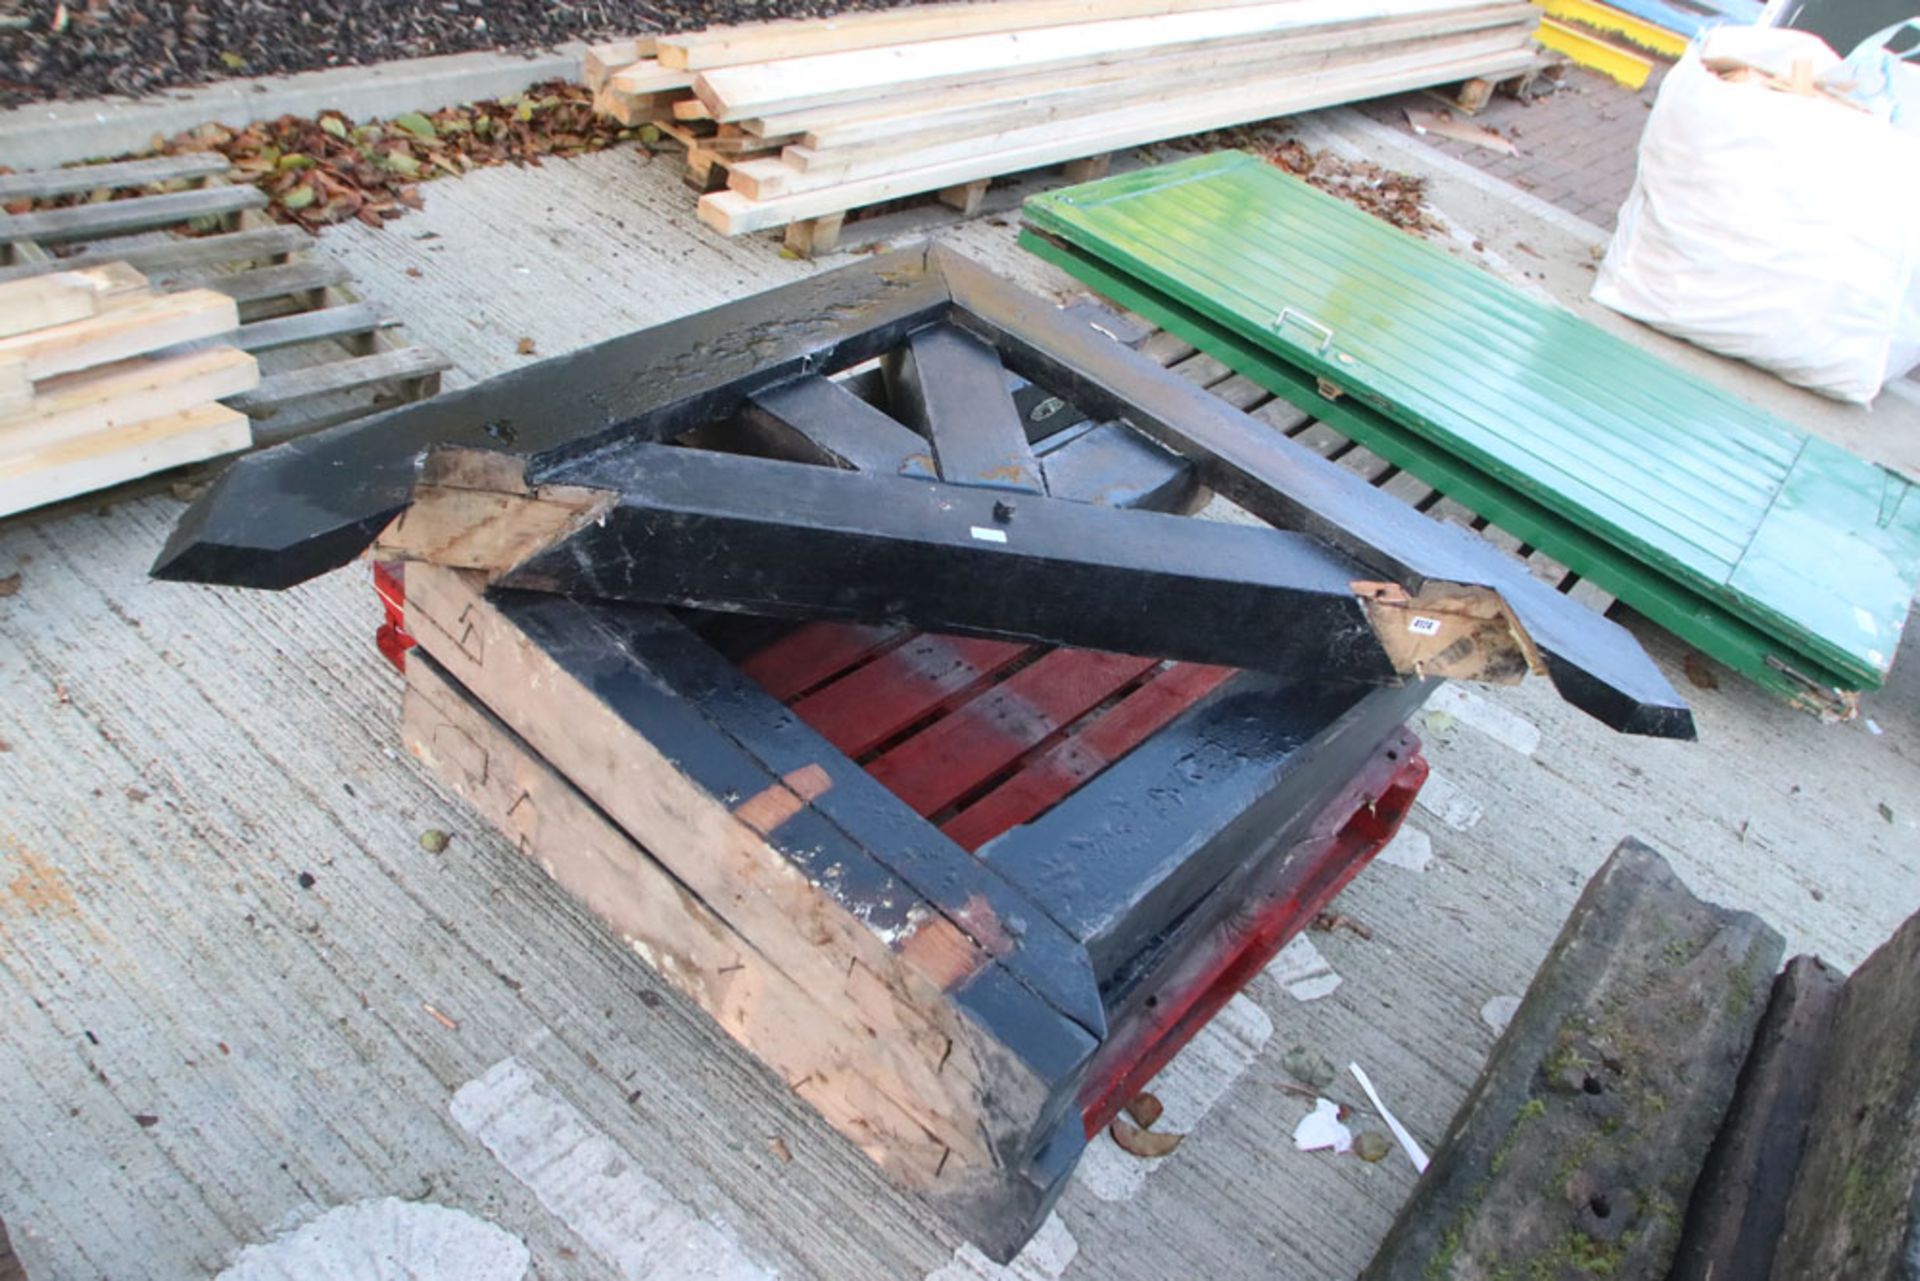 Pallet containing large wooden canopy brackets